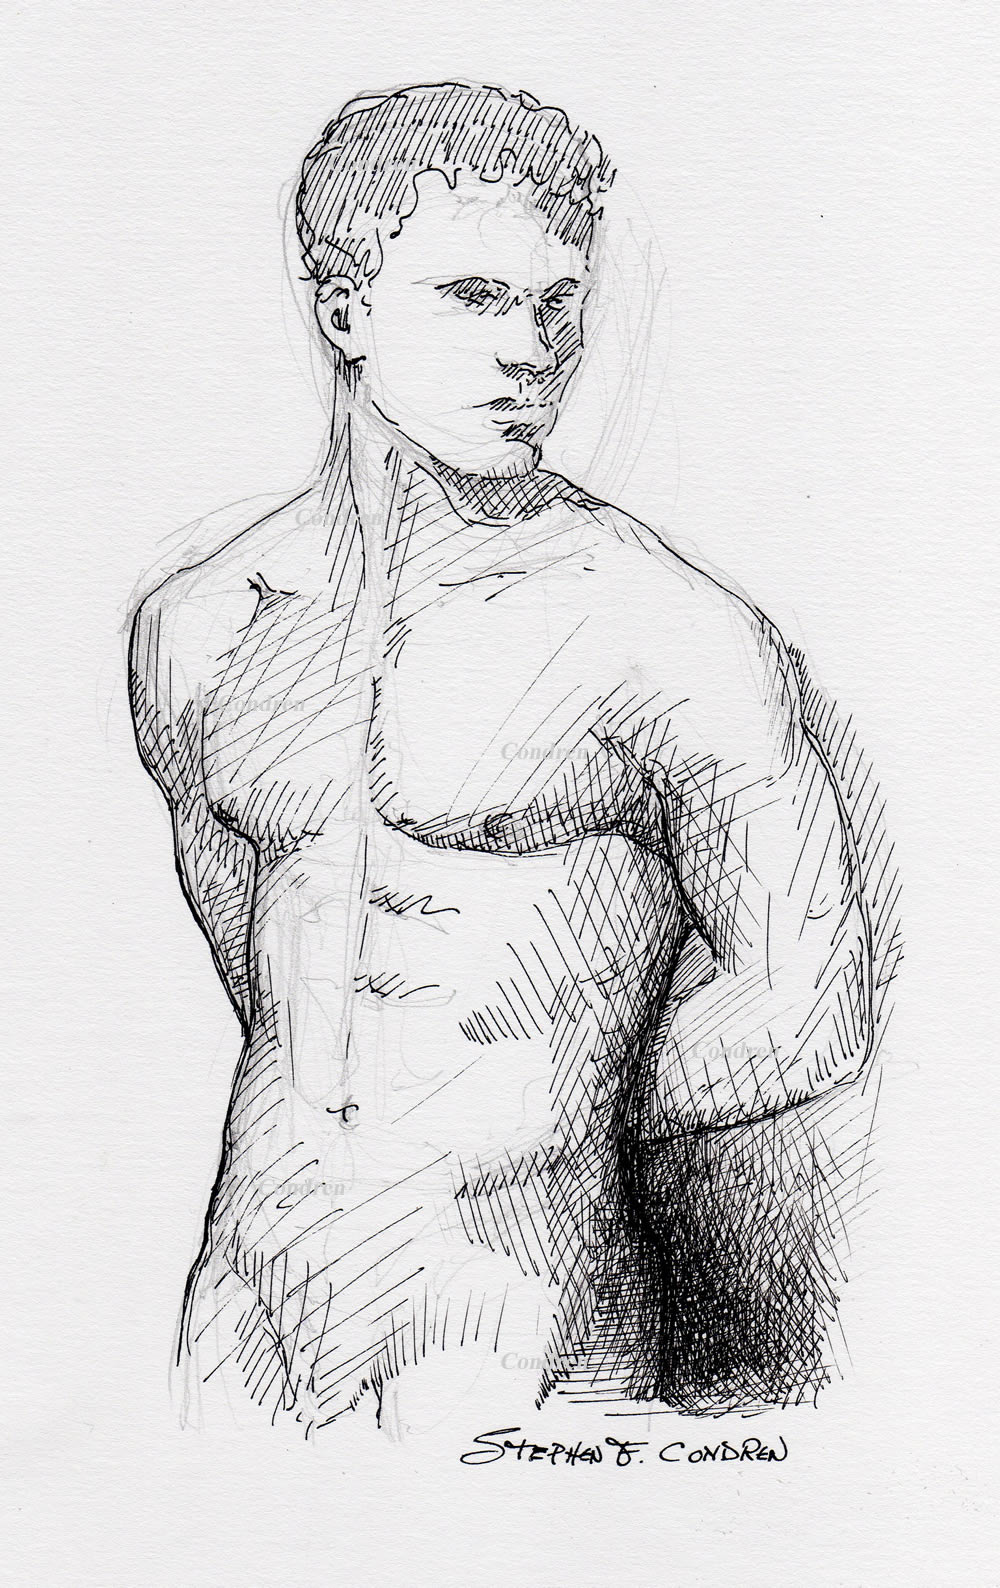 Nude male pen&ink #593Z, a male torso pen & ink drawing with pencil, offering prints & scans, by artist Stephen F. Condren of Condren Galleries, with gay LGBTQ approved prints, and scans.